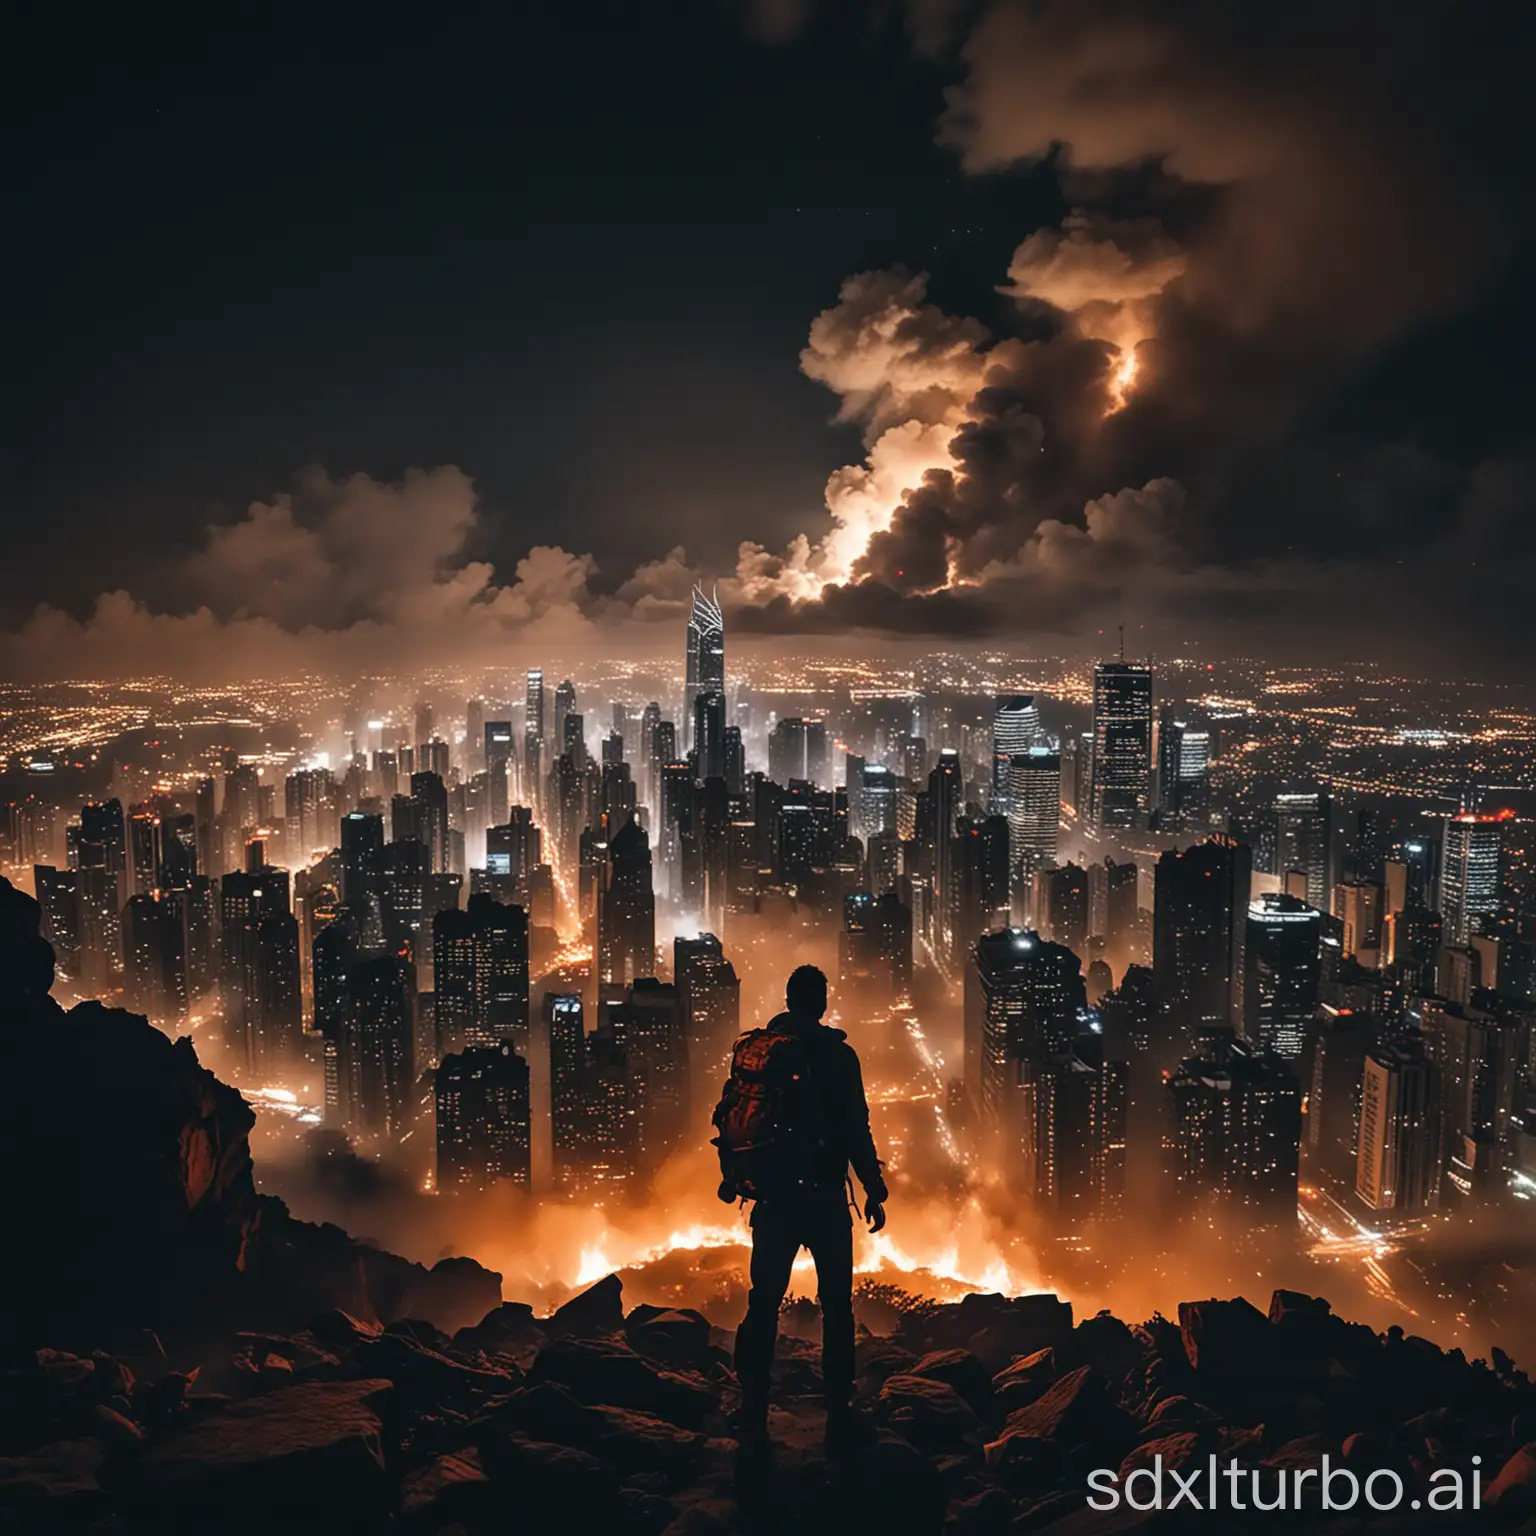 One person with a backpack in the shade at night looking at a Huge city with skyscrapers up to the clouds that is all on fire